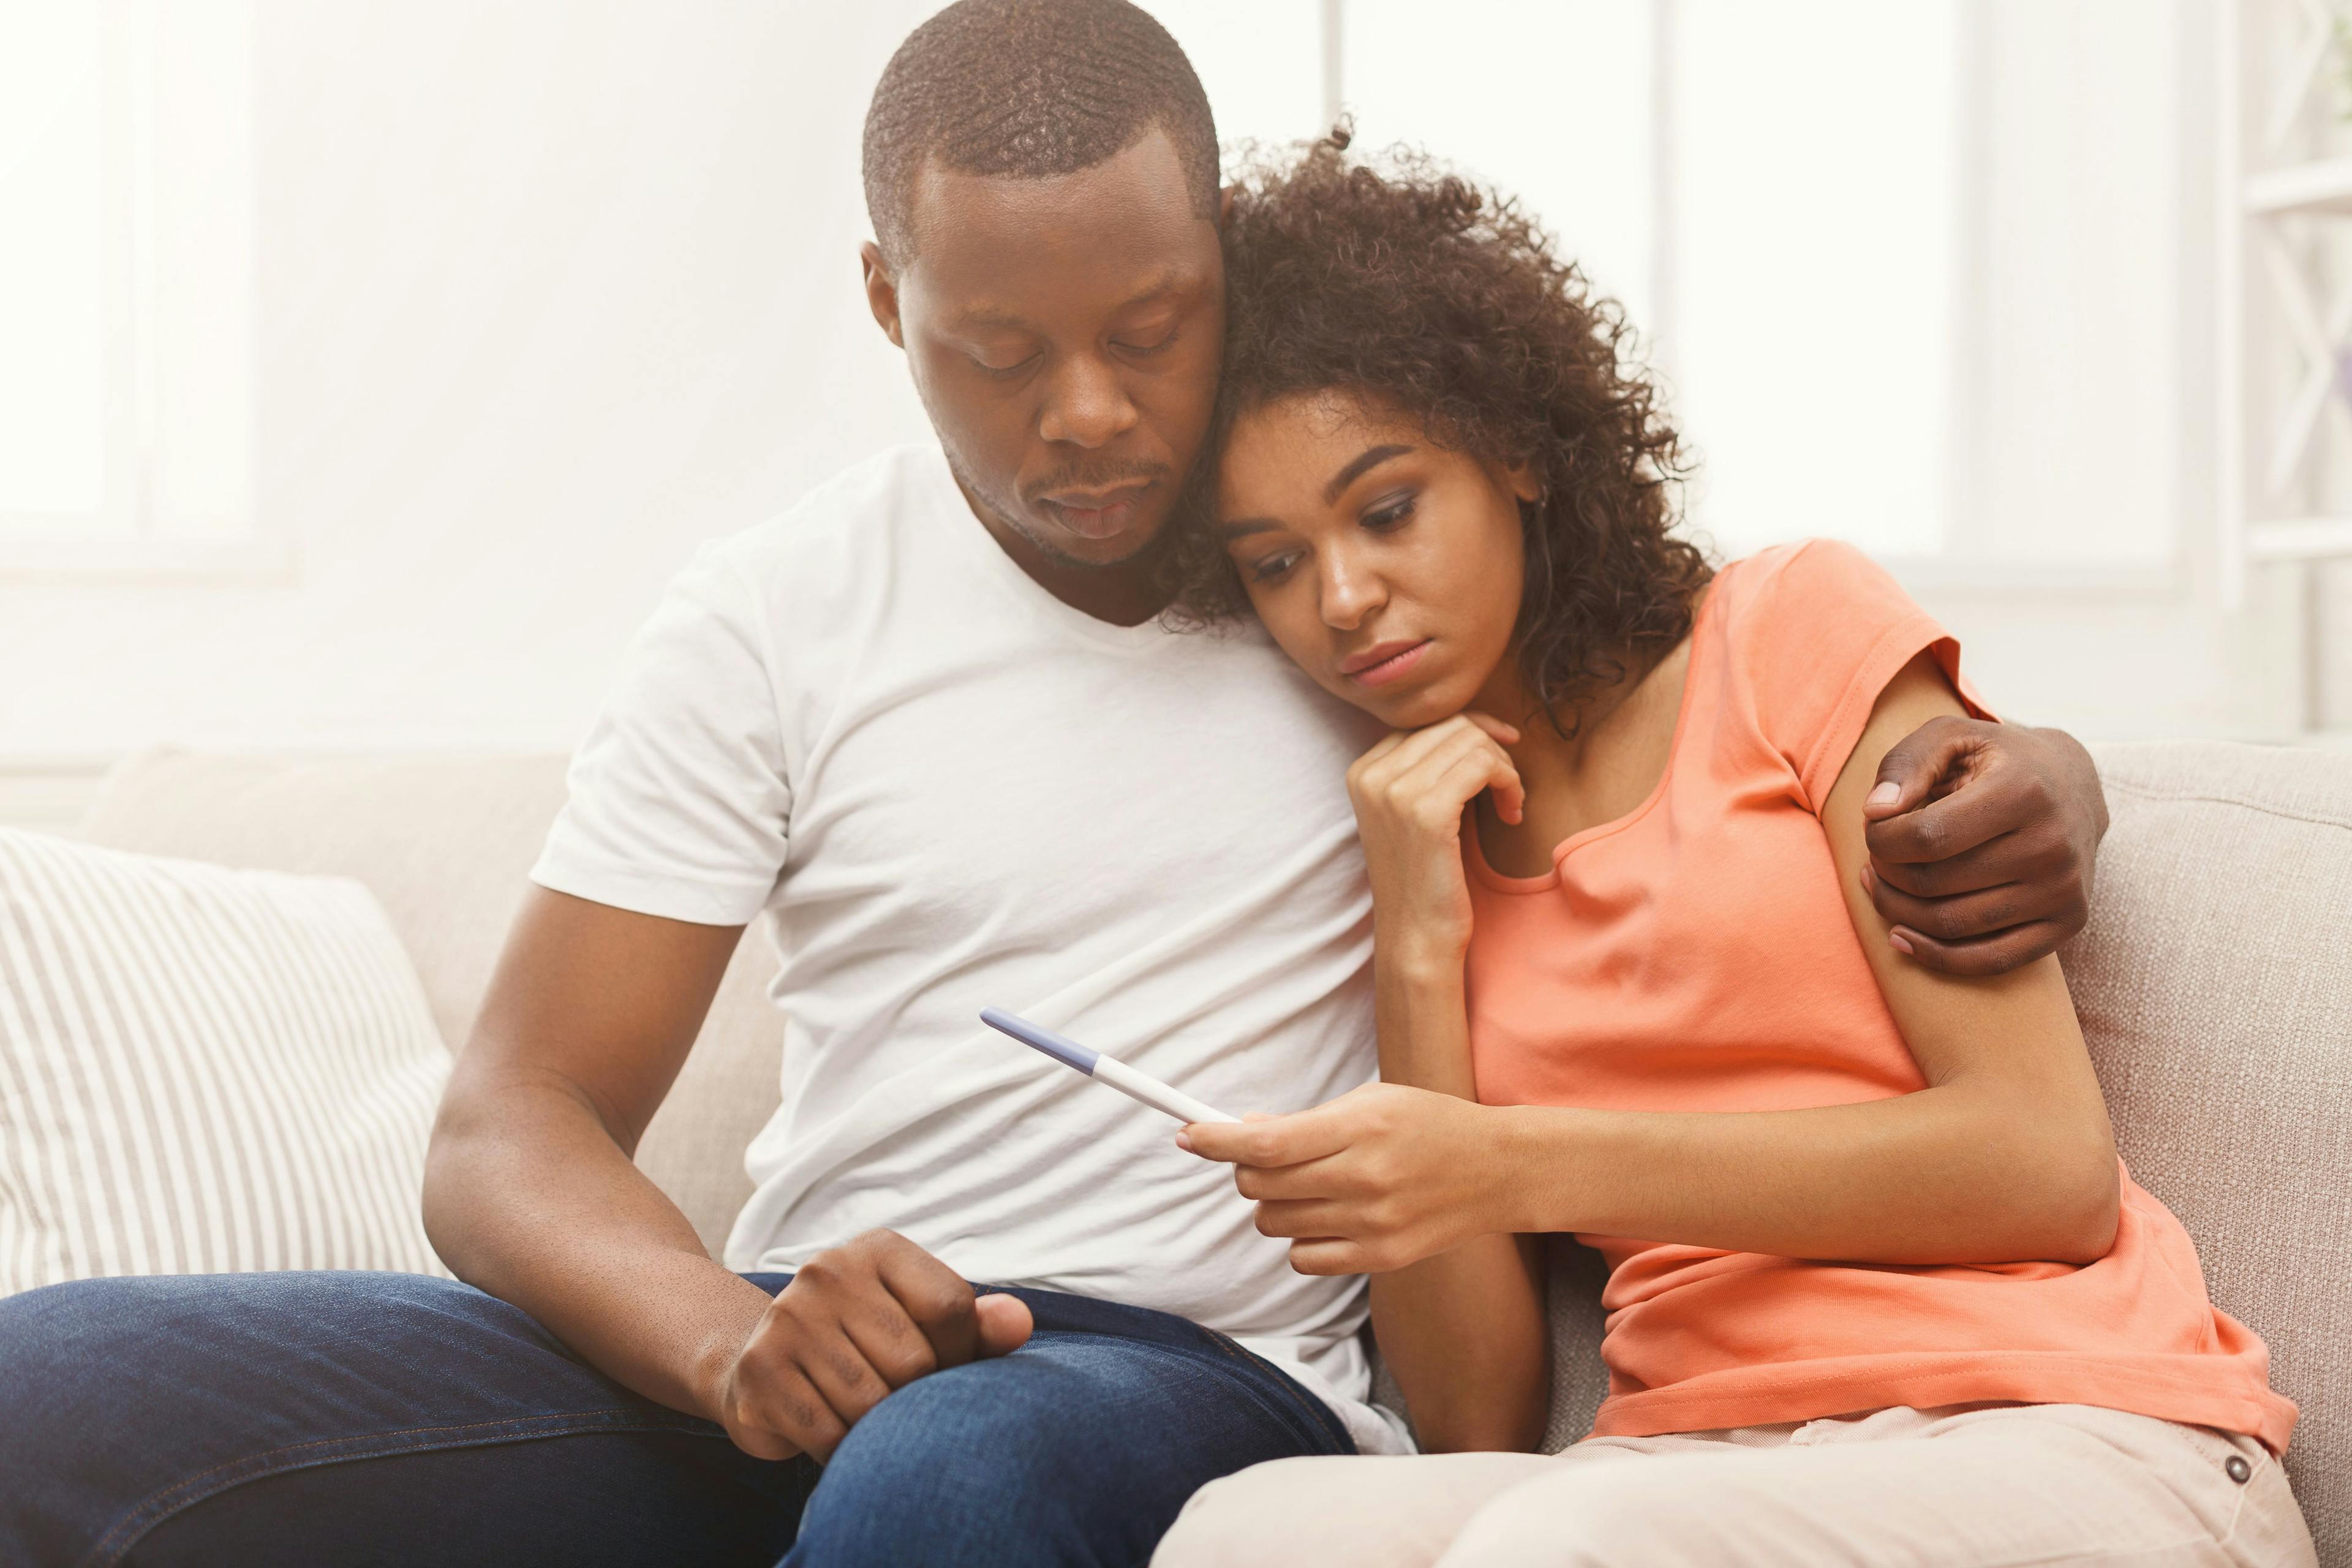 Sad couple sitting on a couch looking at a pregnancy test